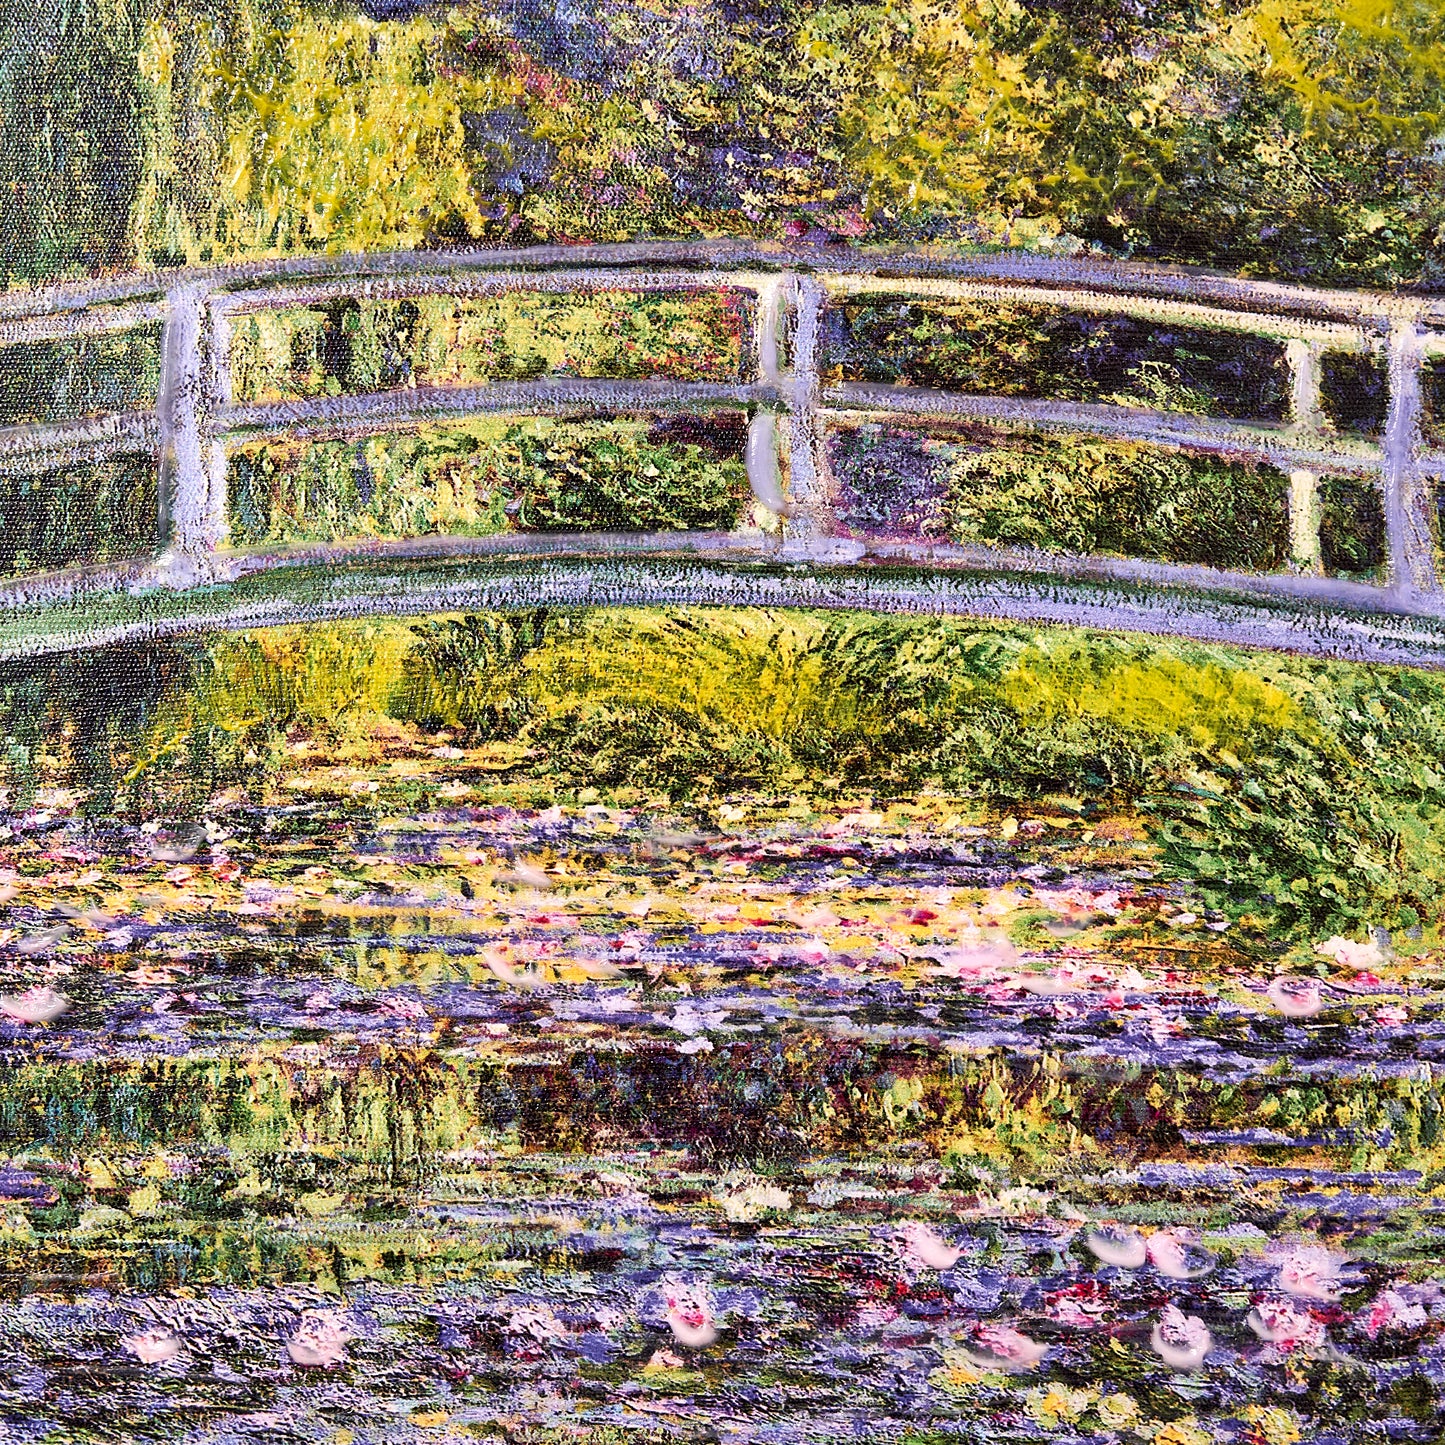 Ornate Framed Water Lilies with Bridge Canvas Print by Claude Monet 22.75" x 18.75"